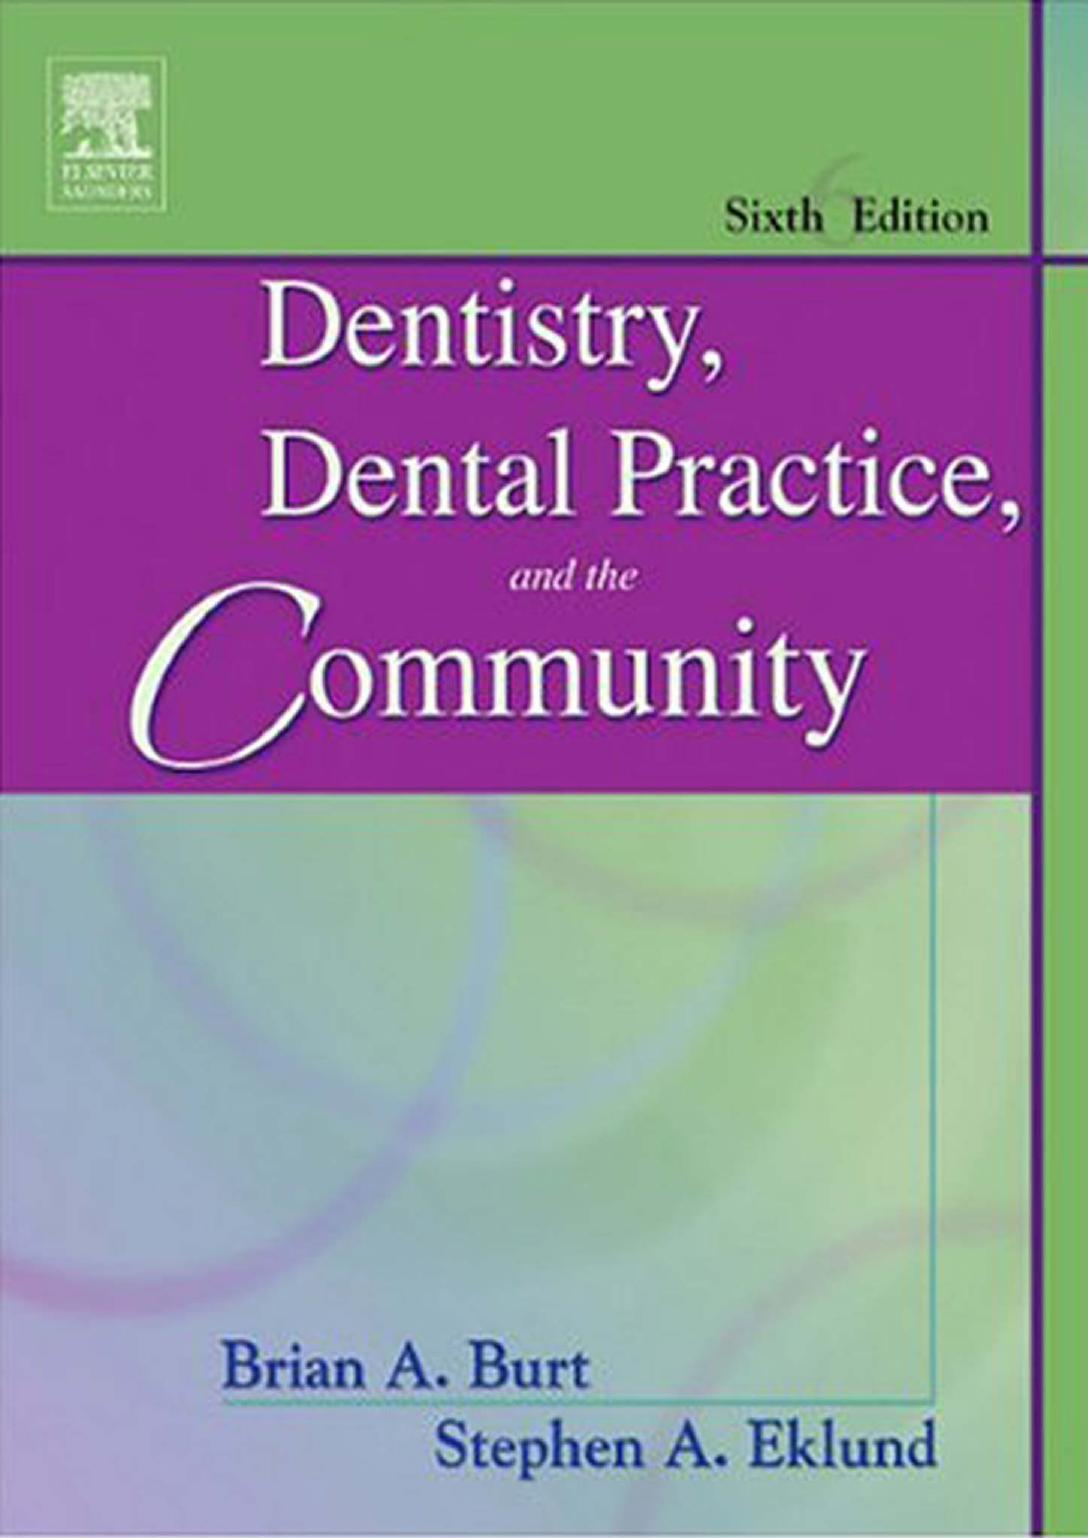 Dentistry, Dental Practice, and the Community - E-Book Version to be sold via e-commerce site